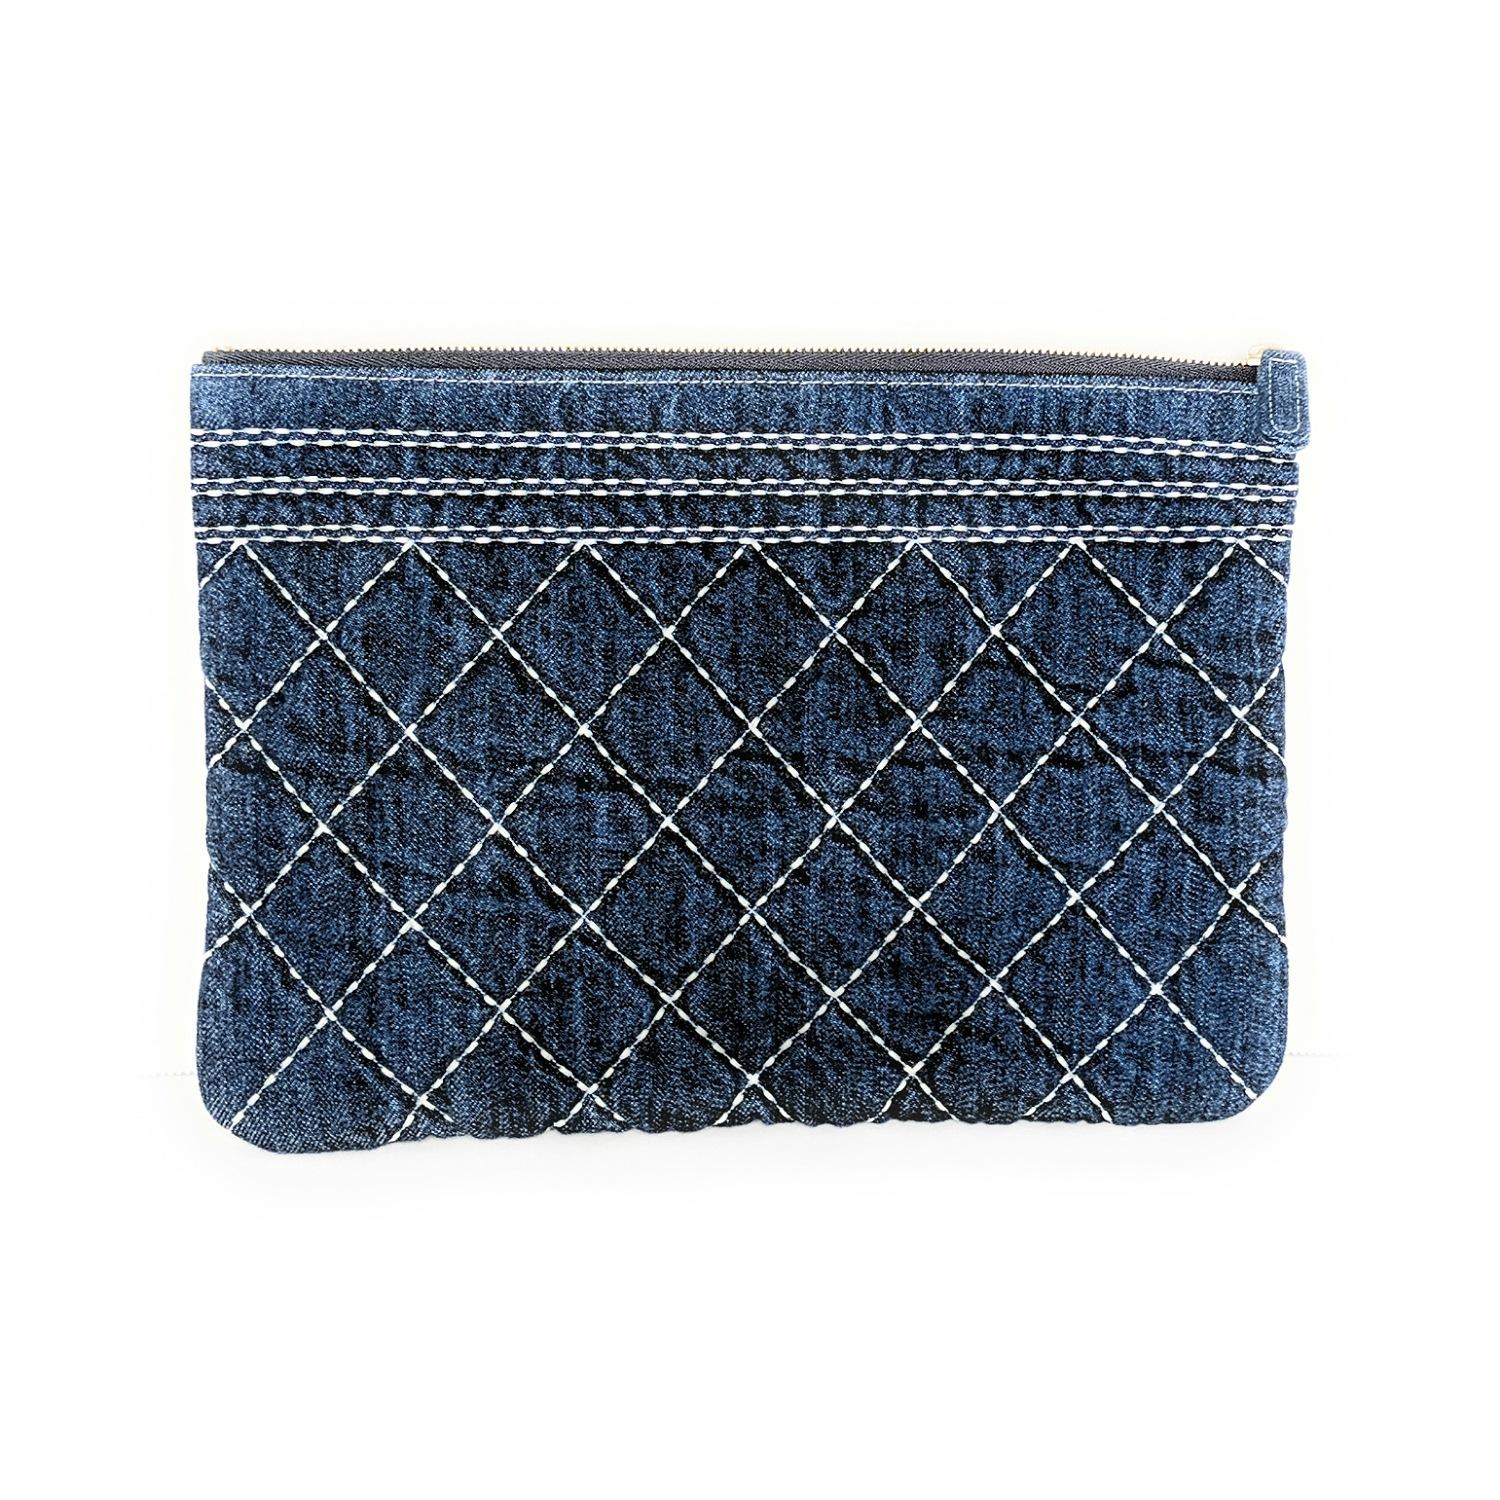 Dark wash denim Chanel CC Quilted Pouch with gold-tone hardware, CC print at front face, tonal nylon lining and zip closure at top. This would make a great gift for that special lady in your life.

Designer: Chanel
Material: Quilted Dark Wash